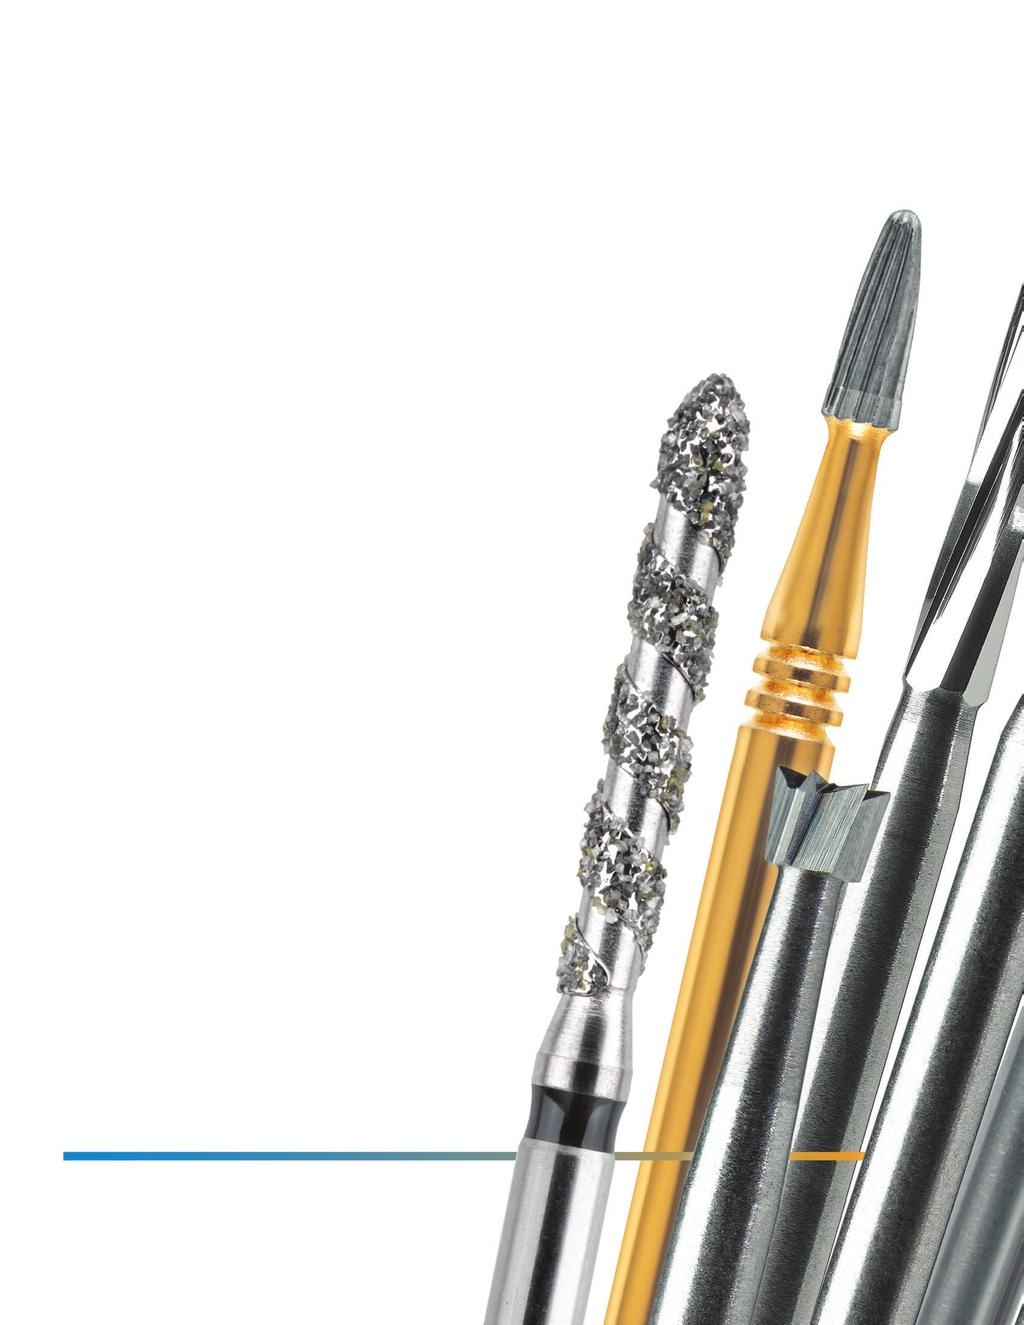 The #1 Choice of Dentists Midwest Carbide and Diamond Burs are America s leading brand, providing the highest quality rotary cutting instruments to the dental industry for nearly half a century, with